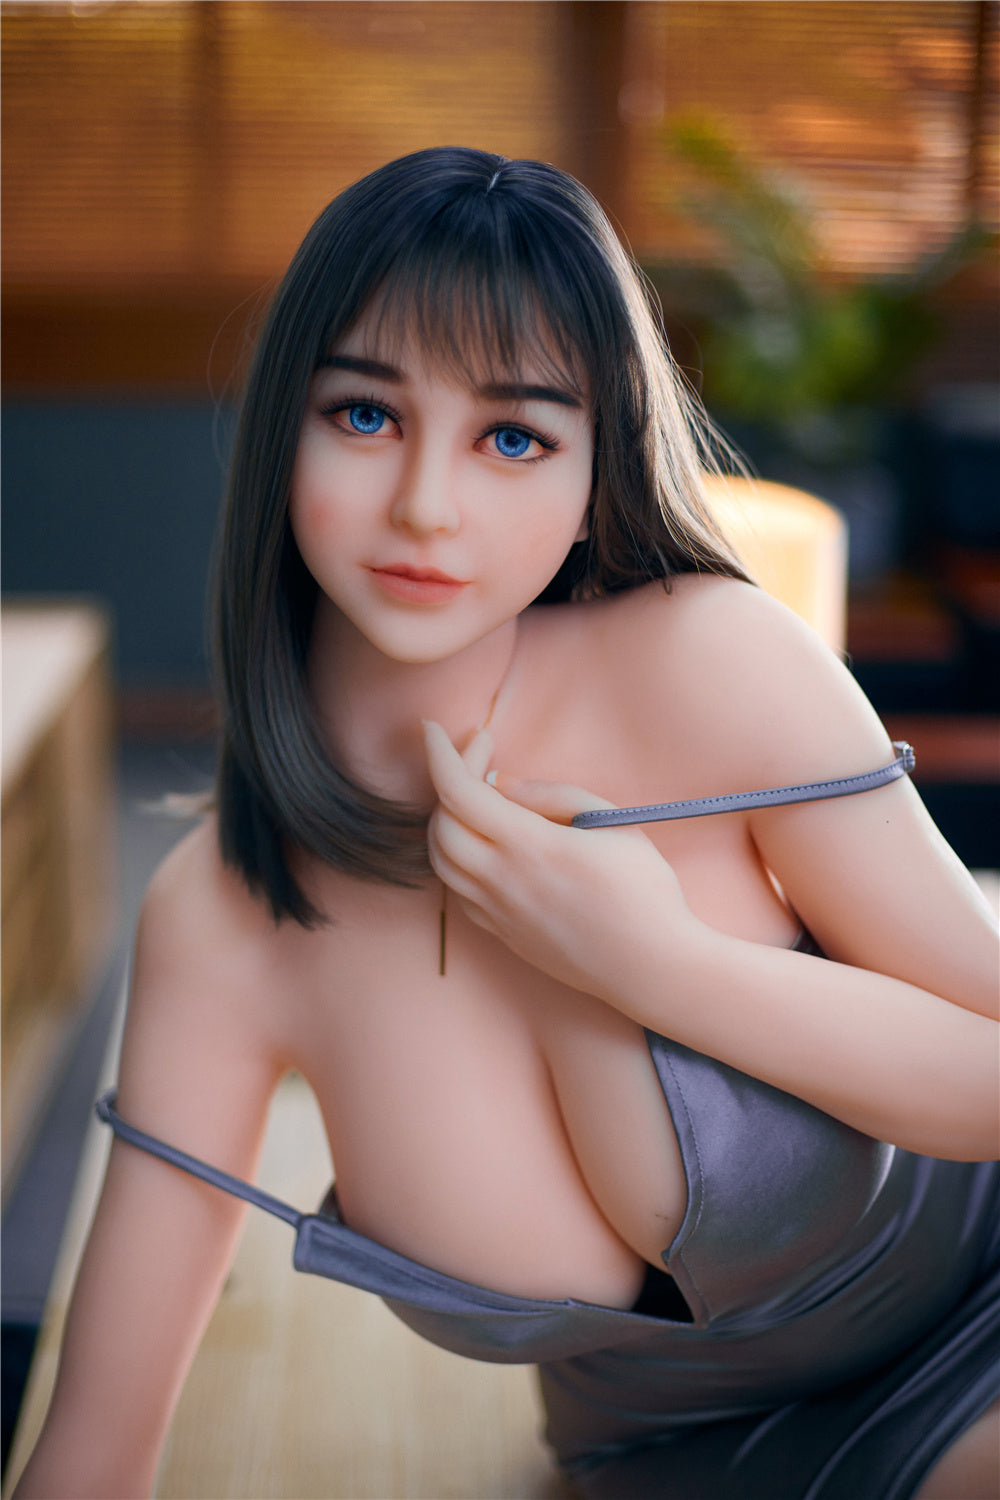 US Stock - Irontechdoll Molly 161cm #58 Big Boobs TPE Sex Doll Realistic Adult Love Doll